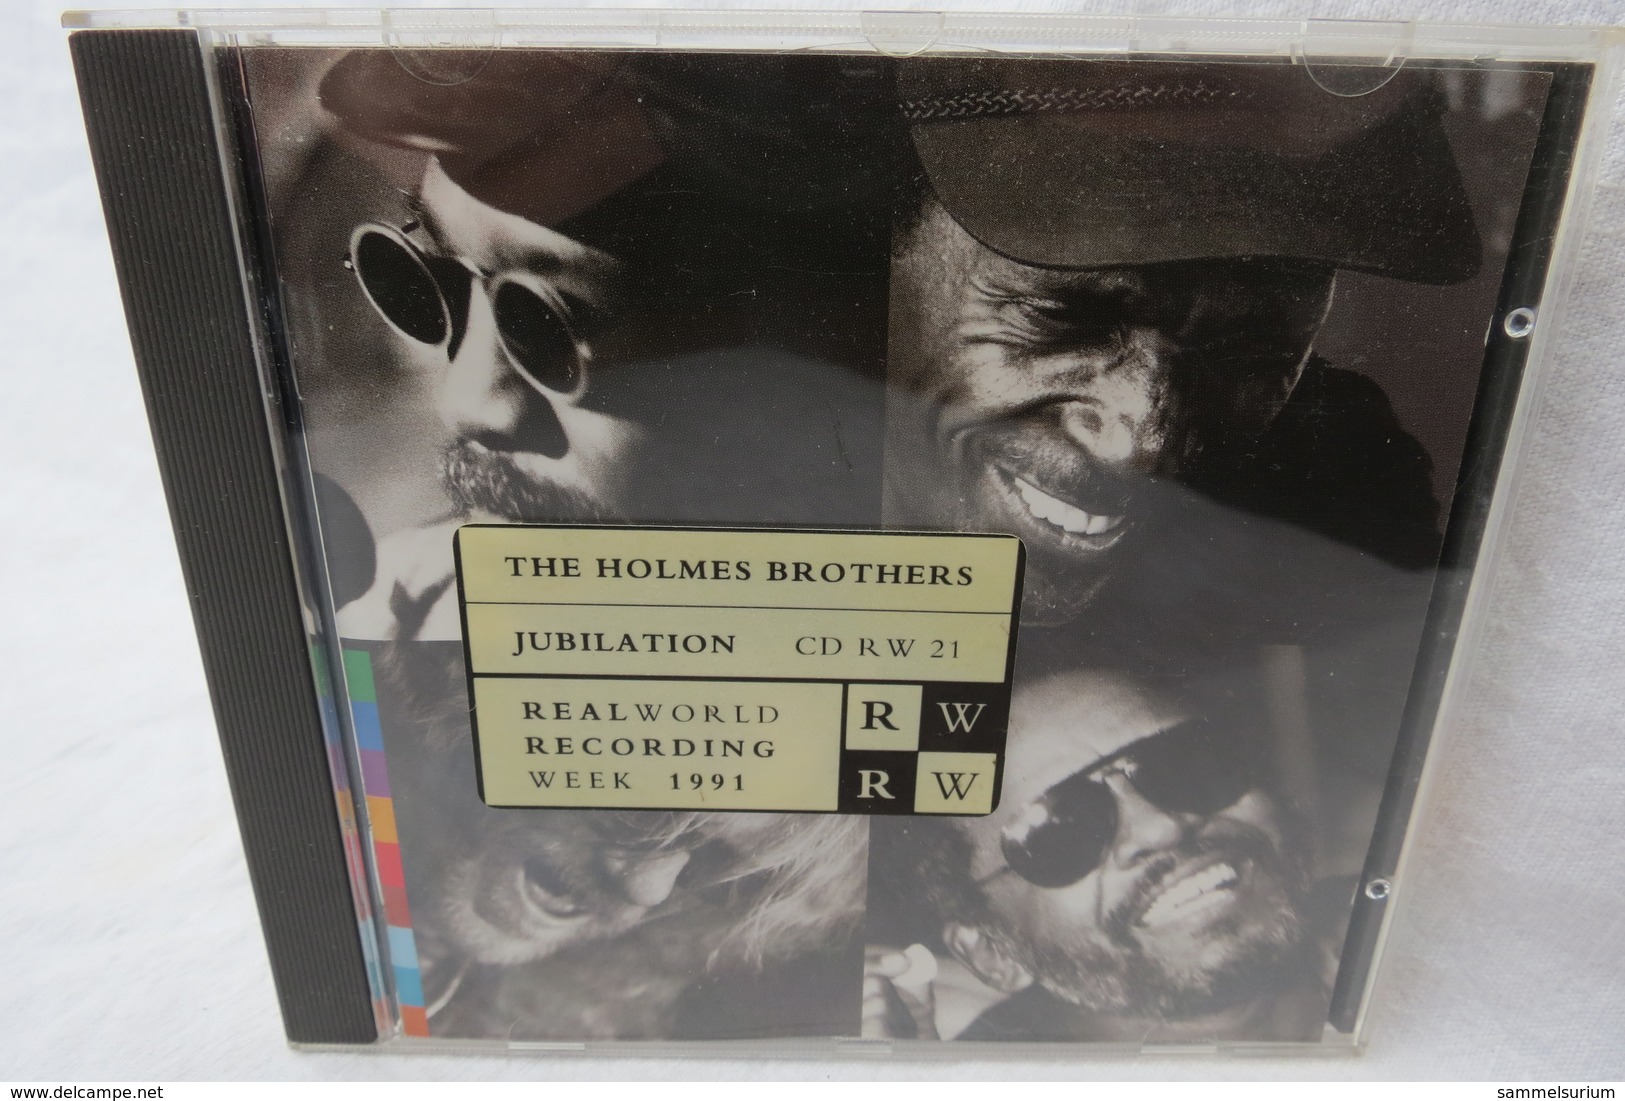 CD "The Holmes Brothers" Jubilation - Blues